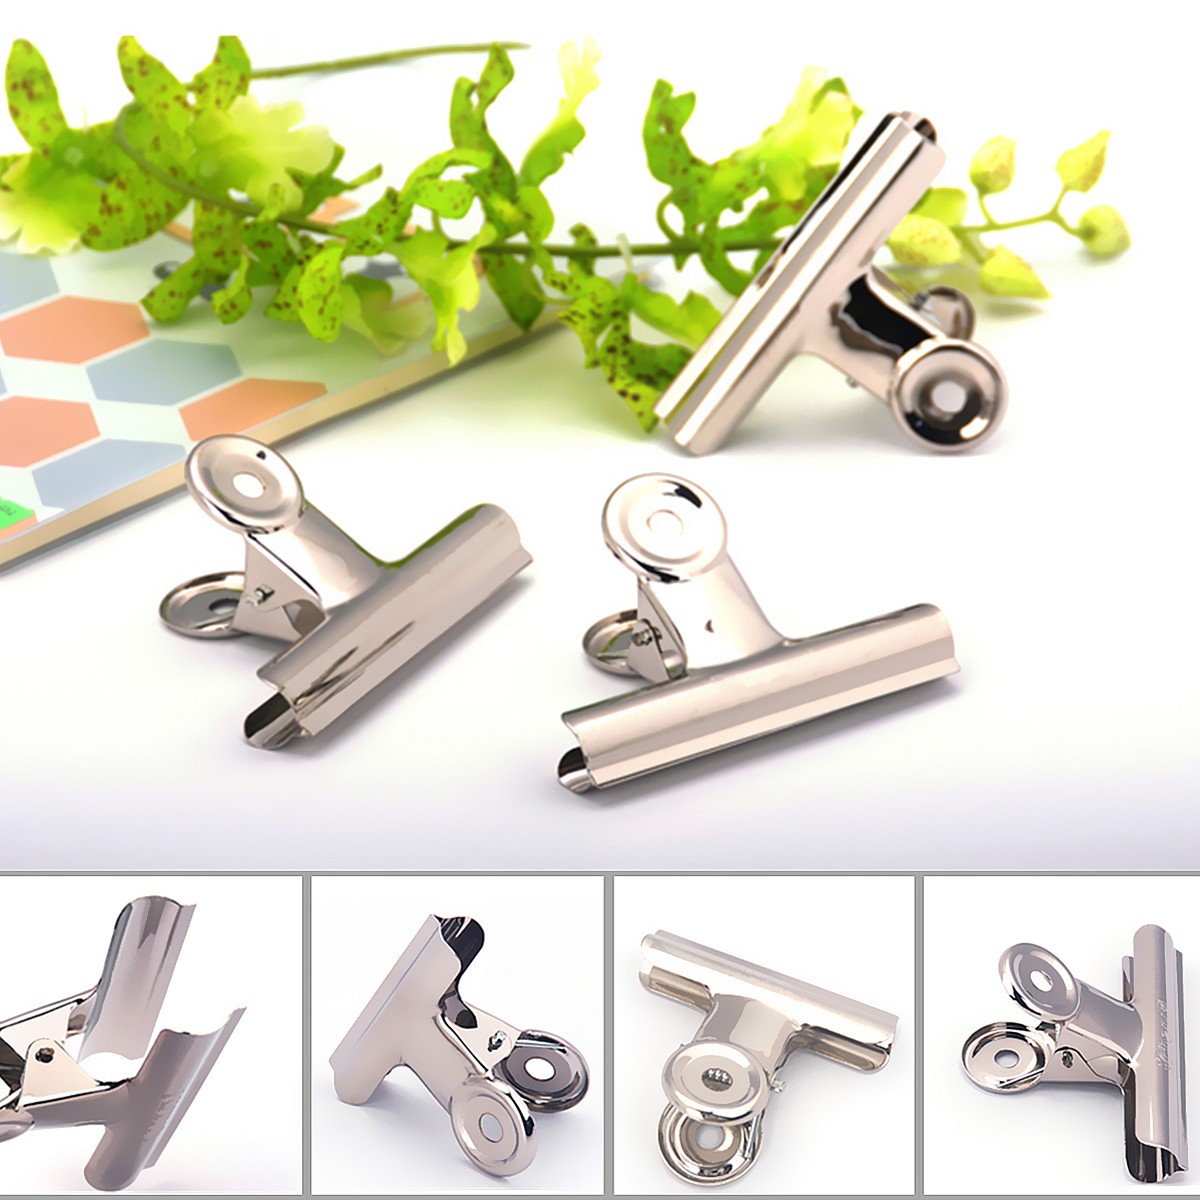 

10pcs 31mm Stainless Steel Silver Bulldog Clips Money Letter Paper File Clamps